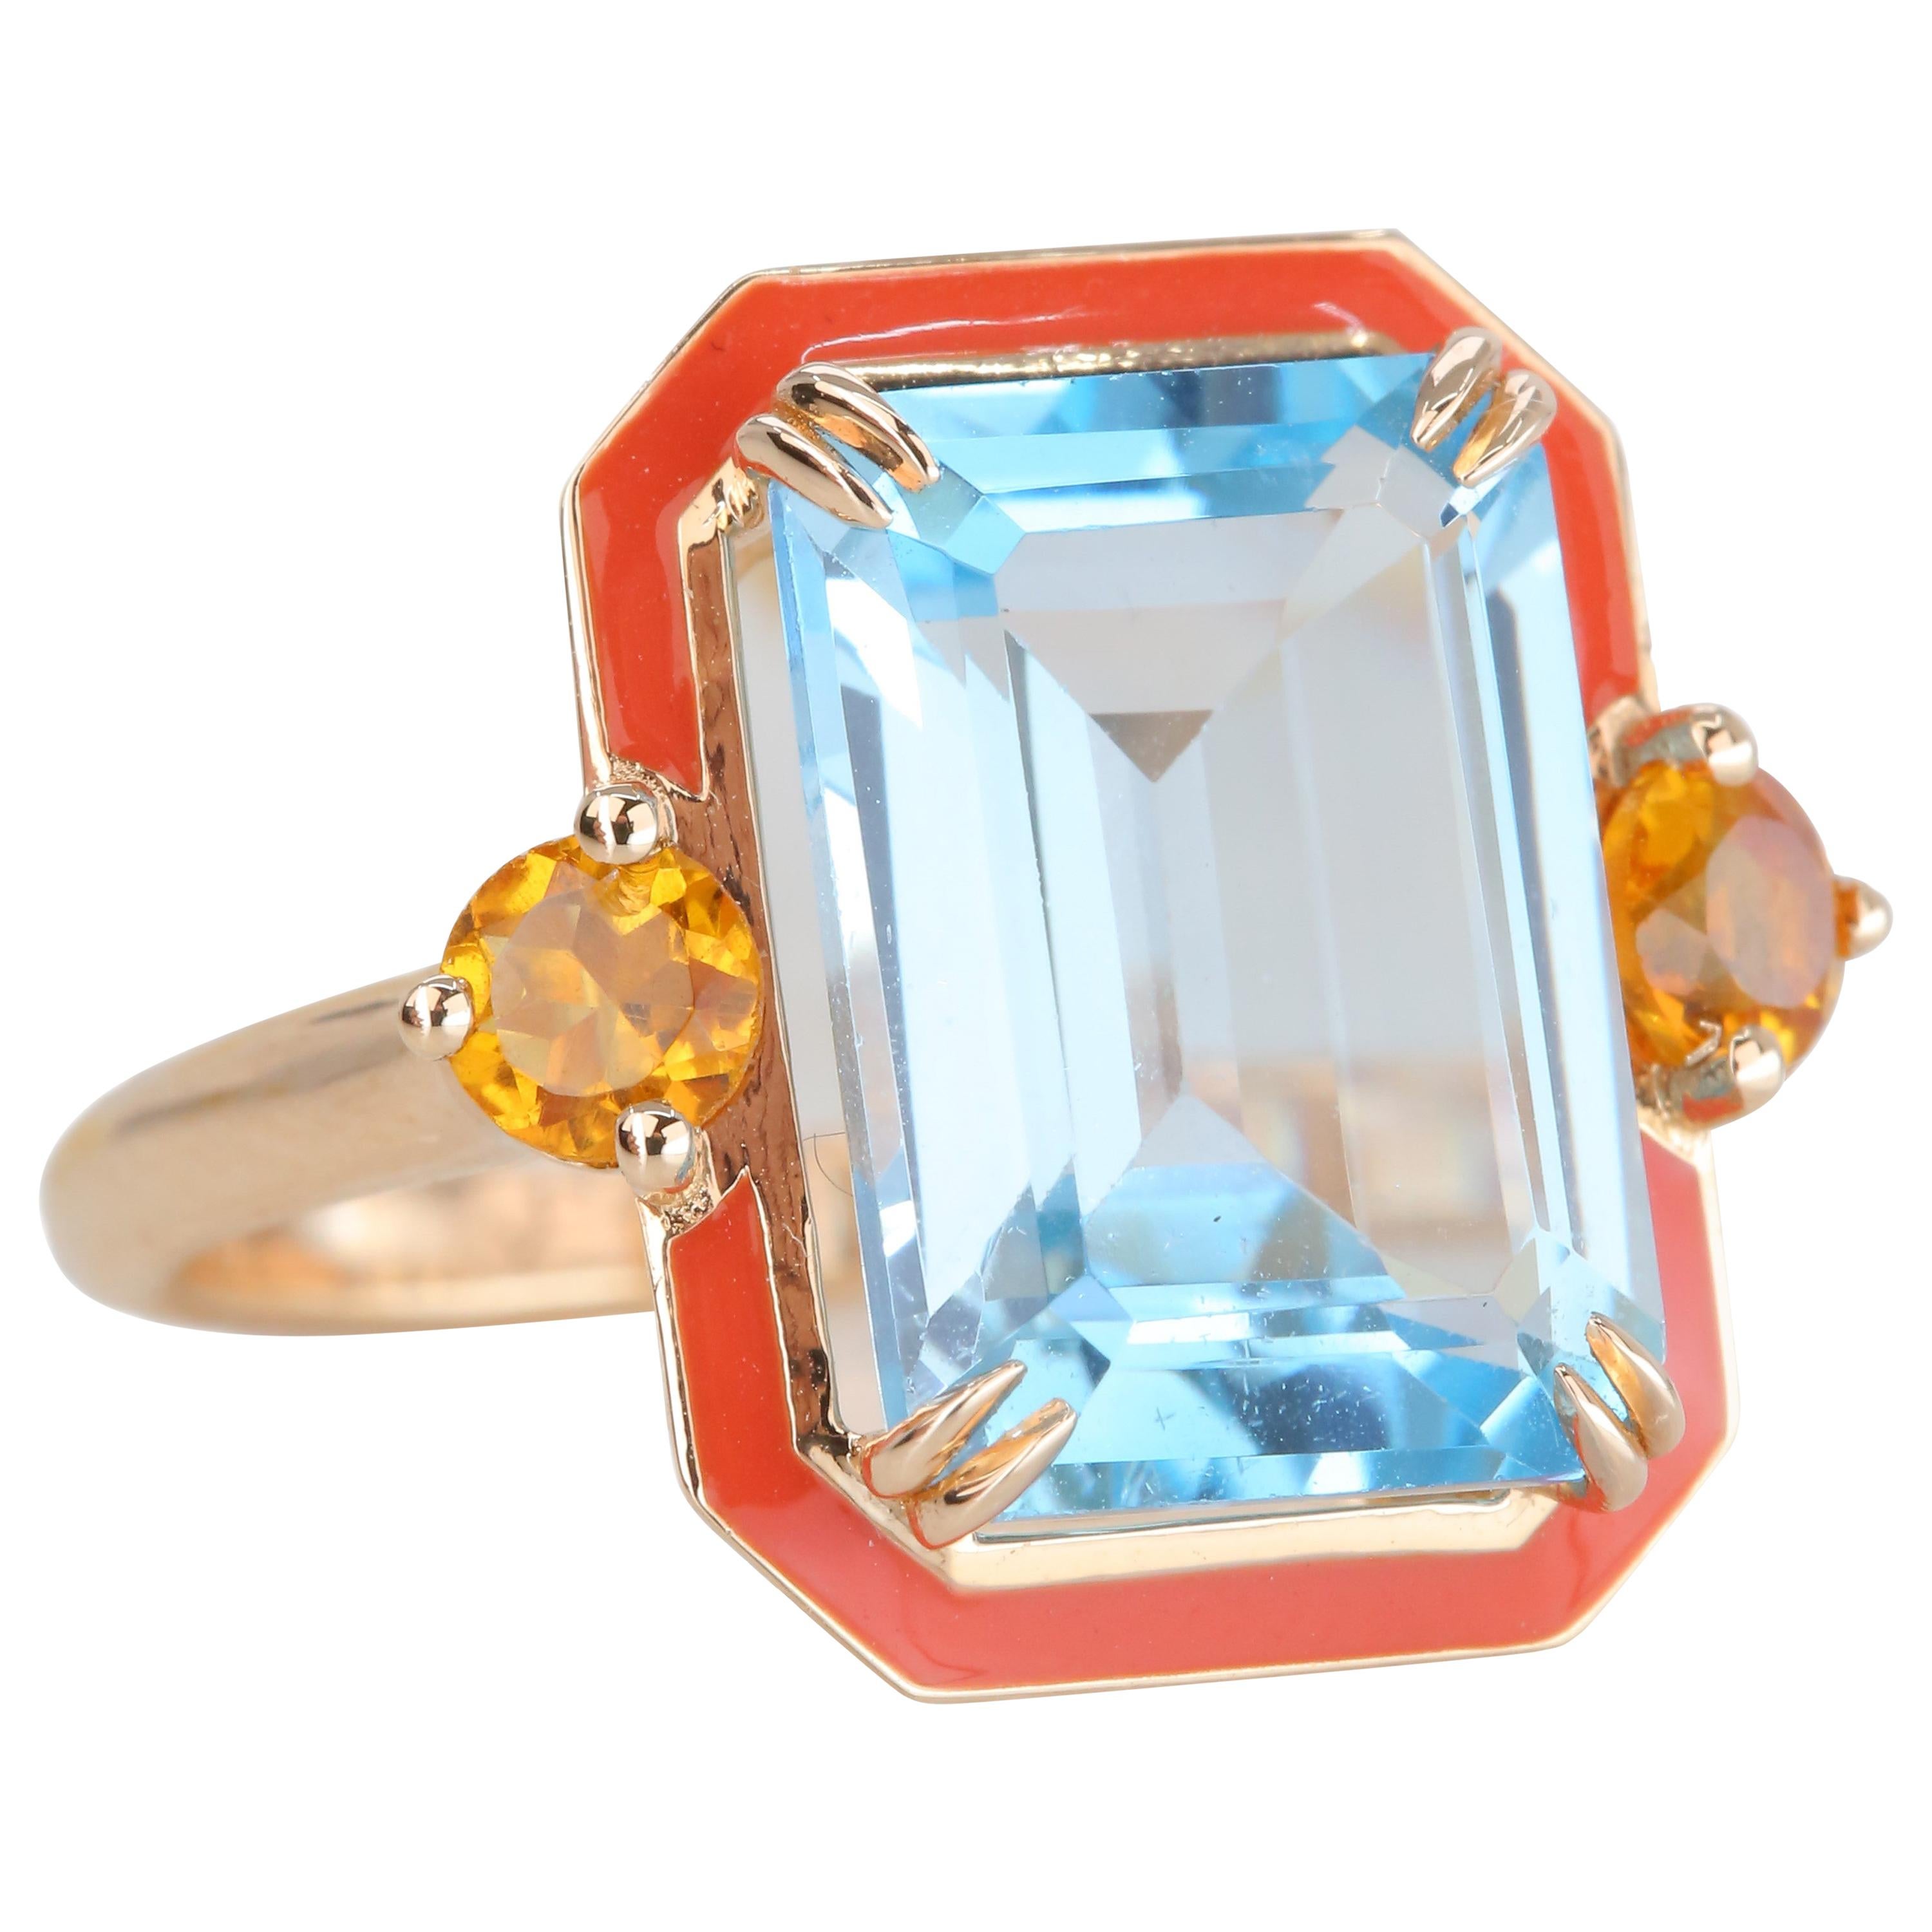 Art Deco Style Enameled Cocktail Ring with Sky Topaz and Citrine